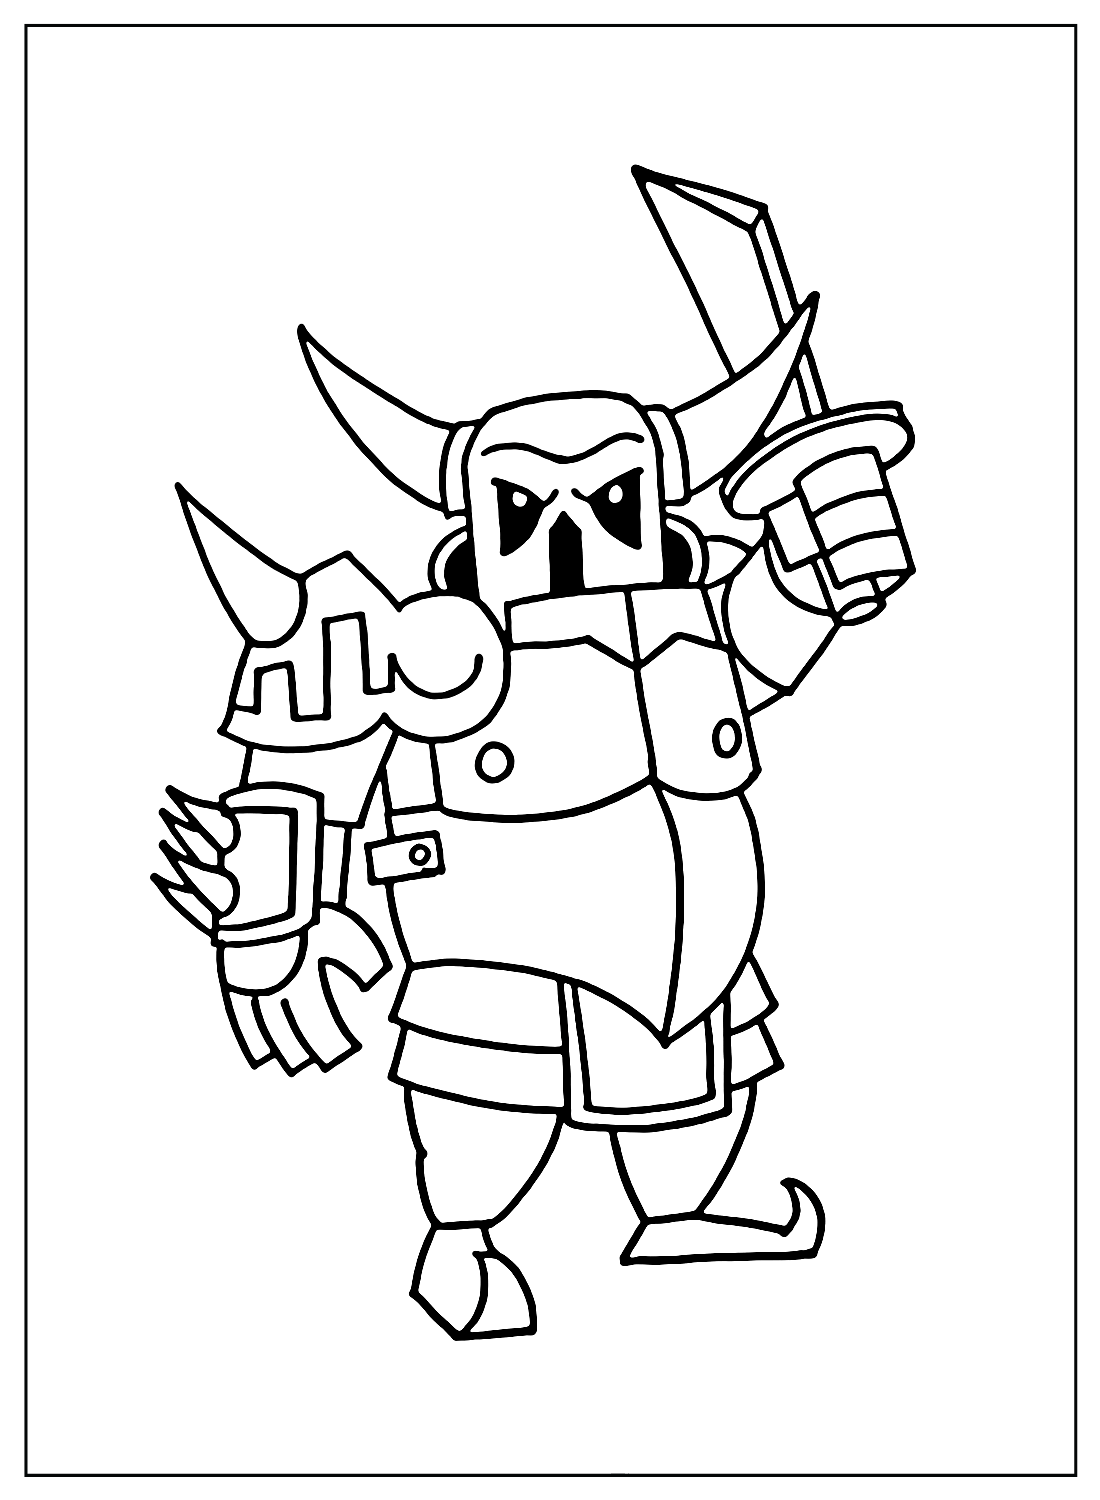 Clash of Clans Pekka Coloring Pages - Free Printable Coloring Pages